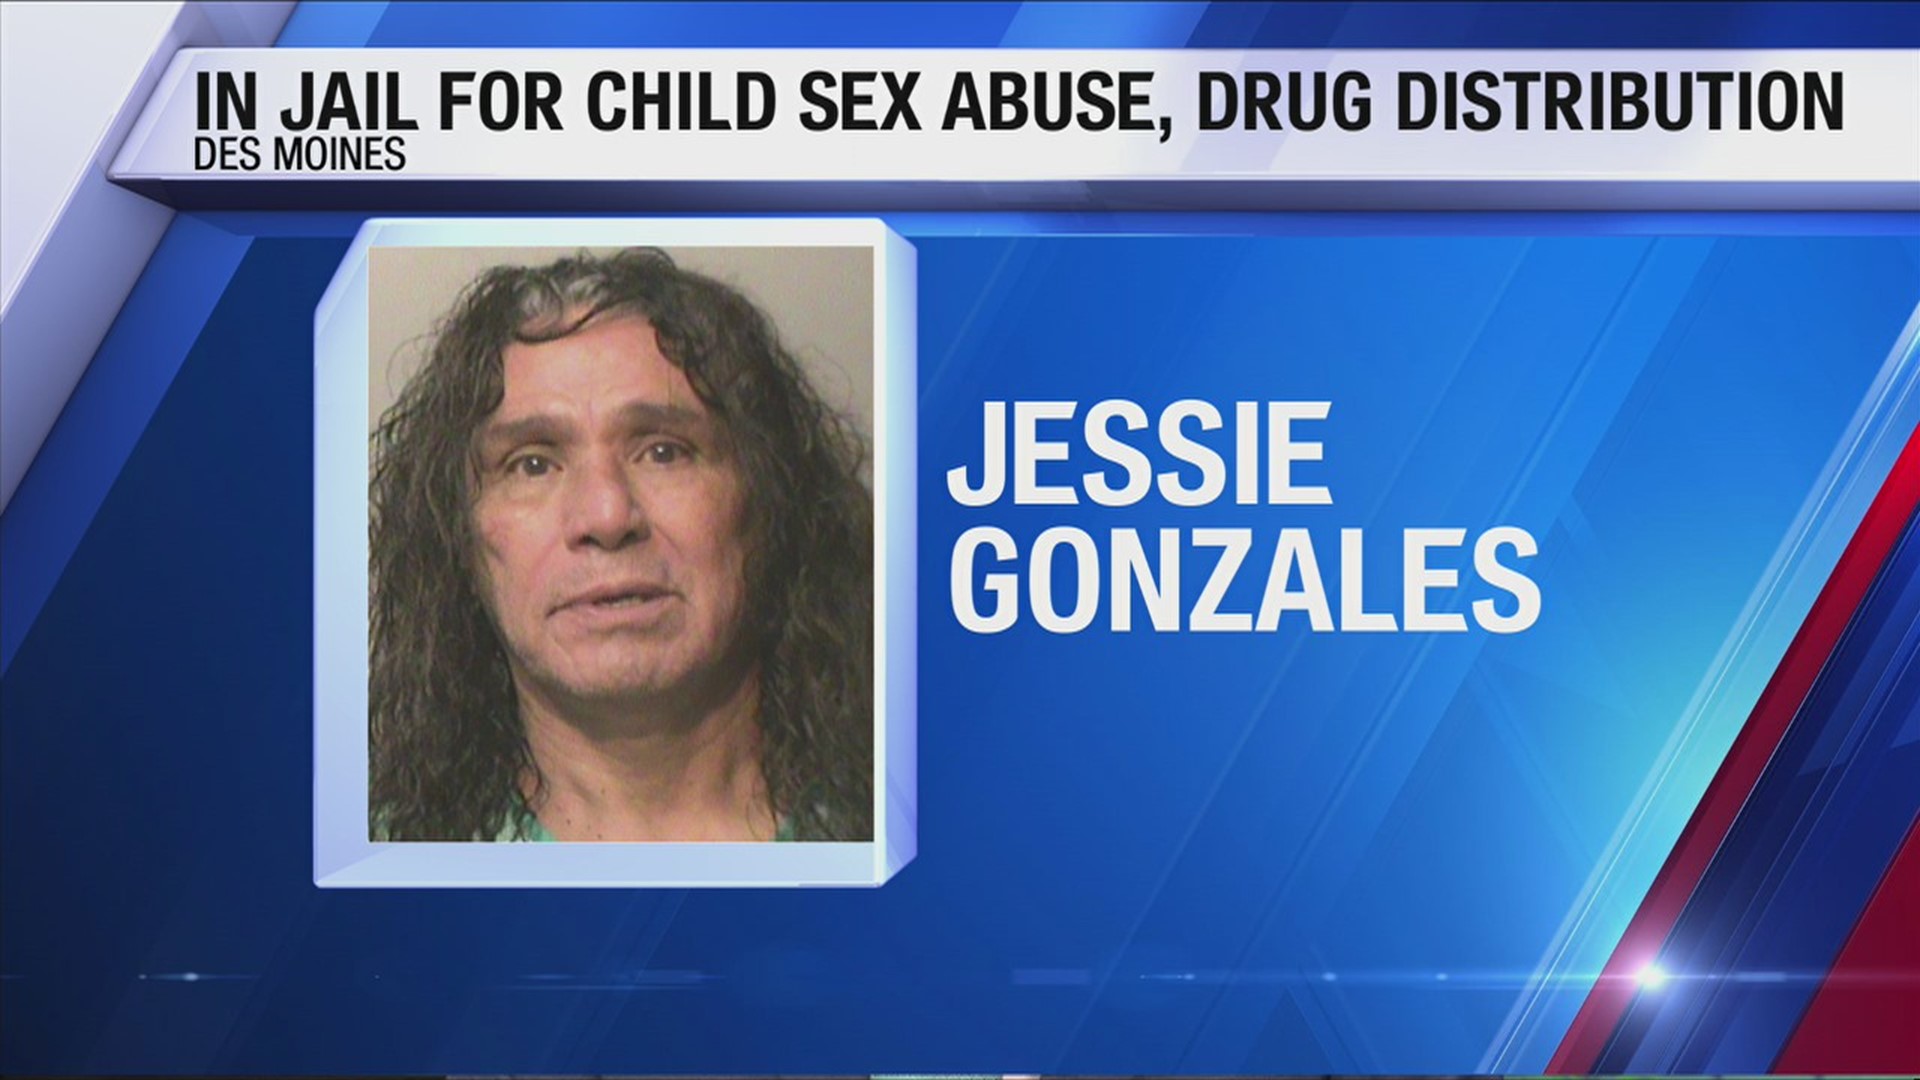 Des Moines man accused of giving drugs, sexually abusing children